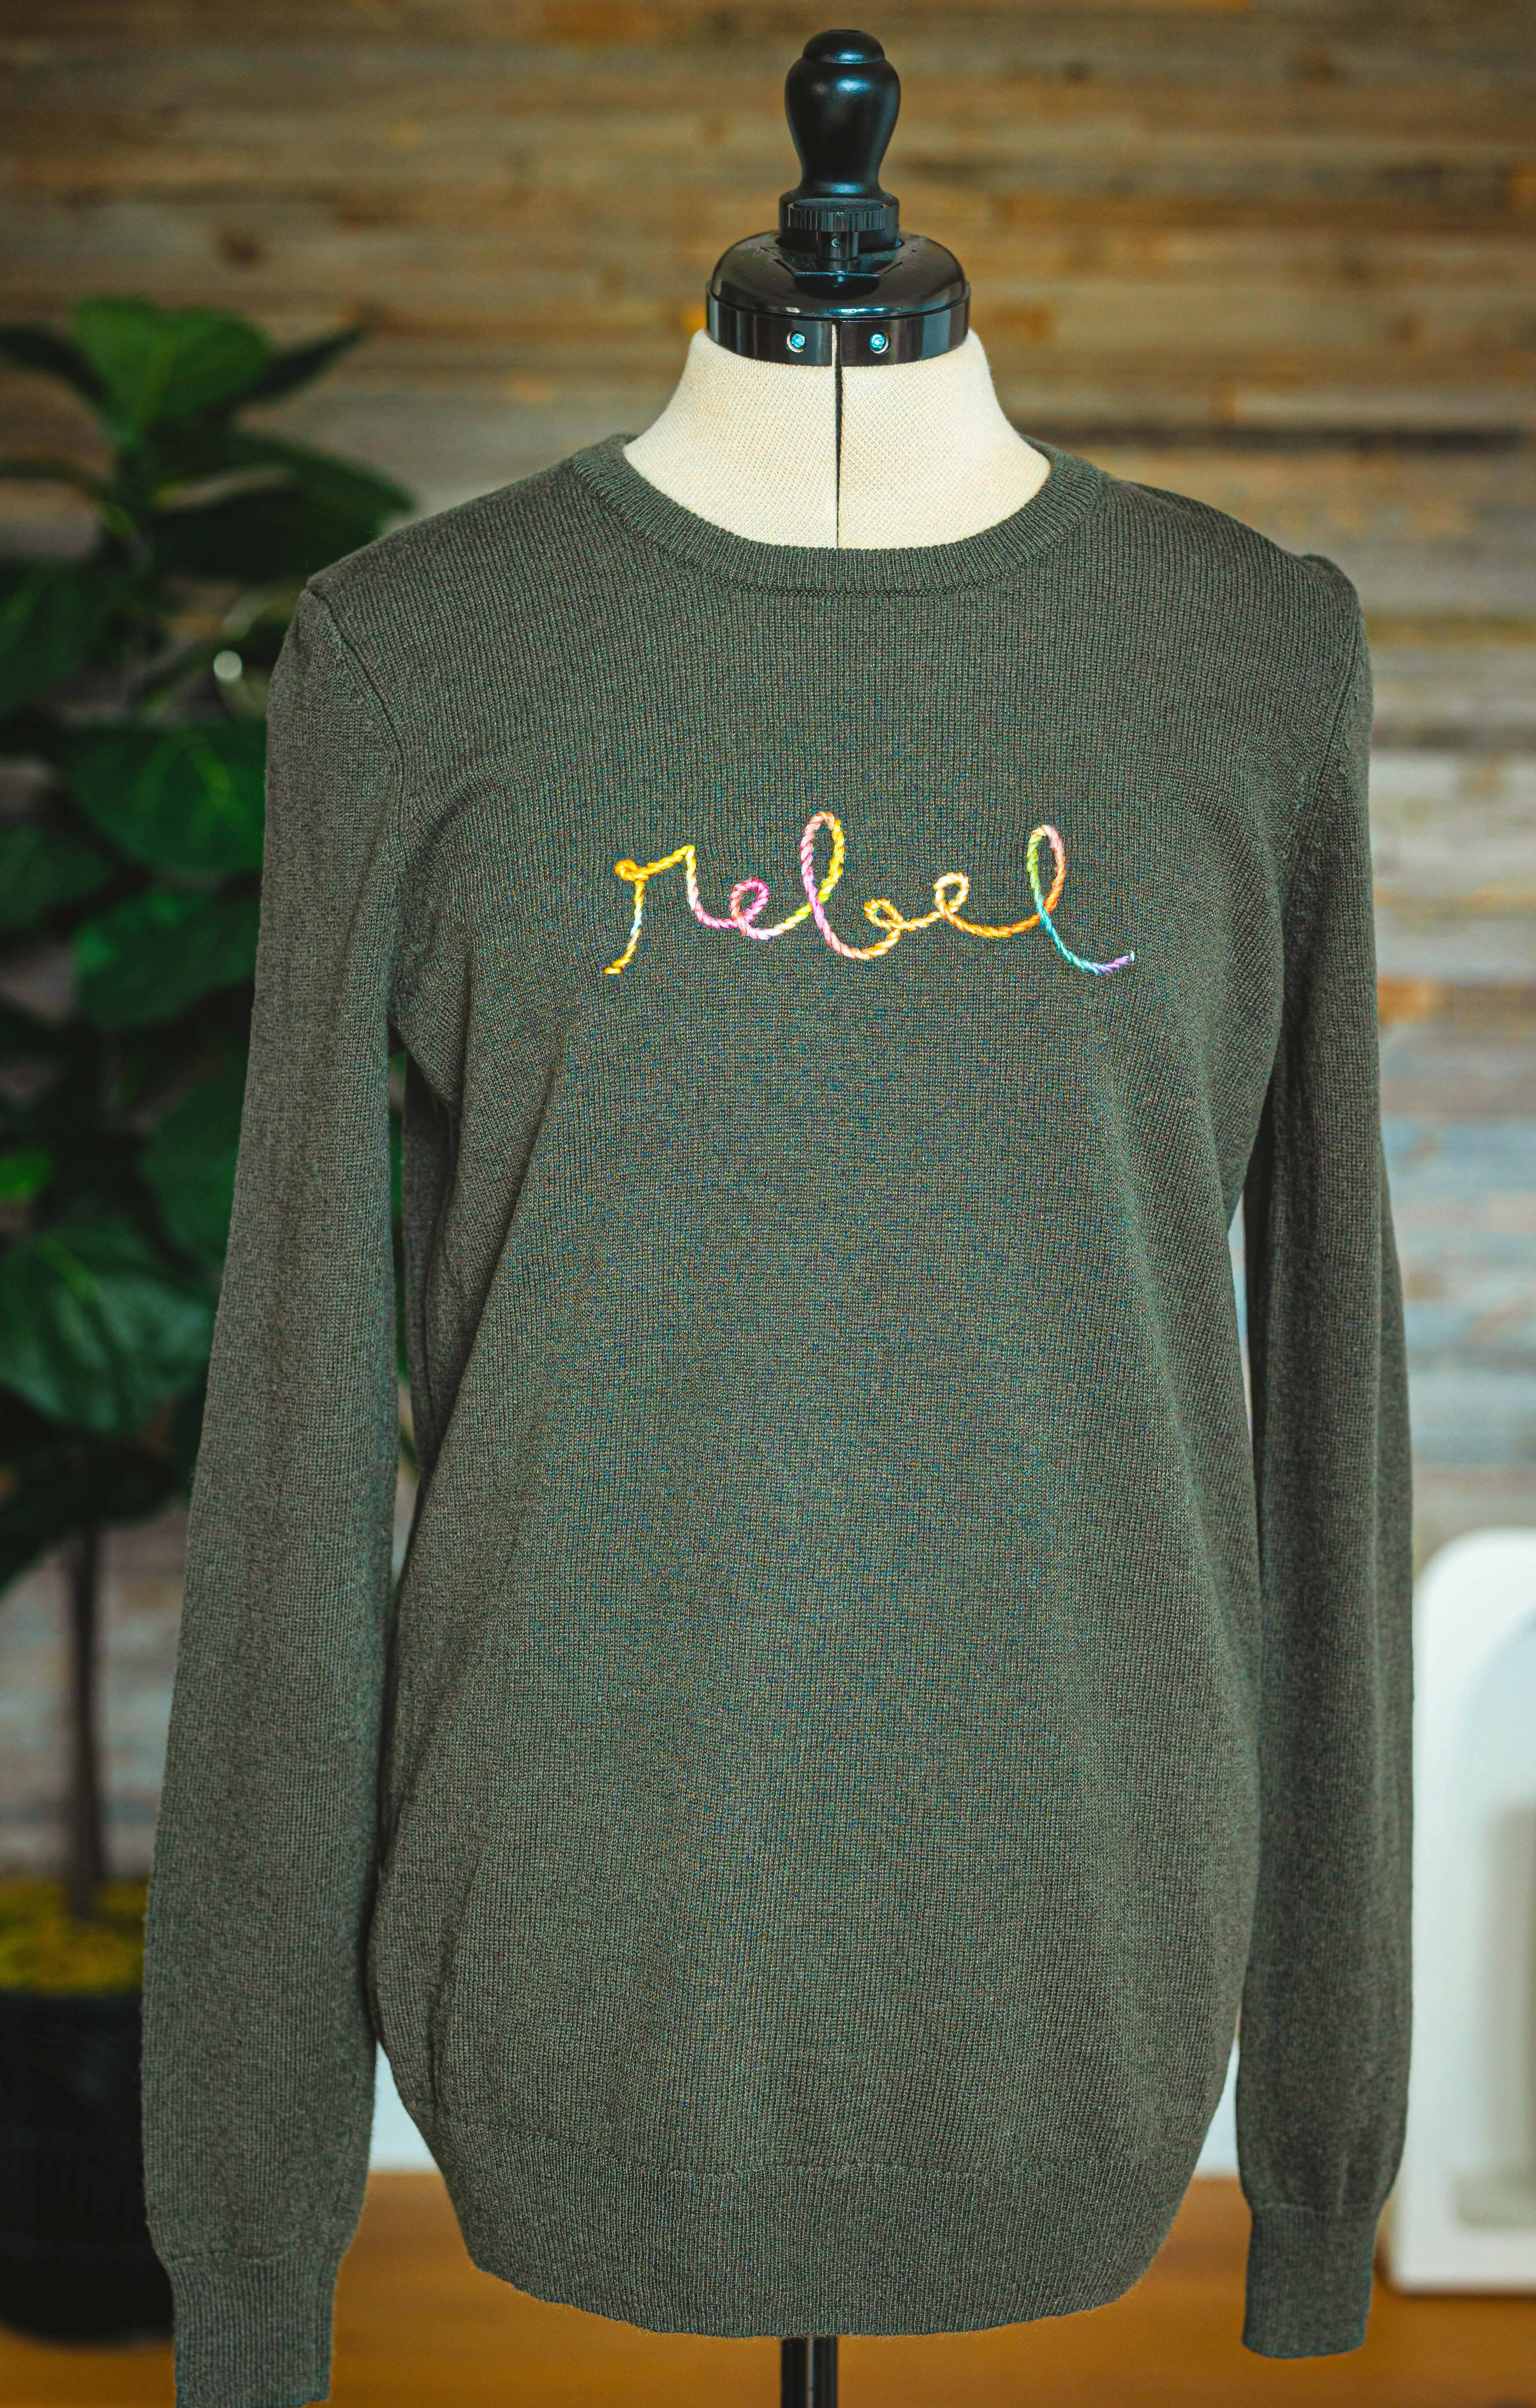 "Rebel" Hand-Embroidered Cashmere Sweater